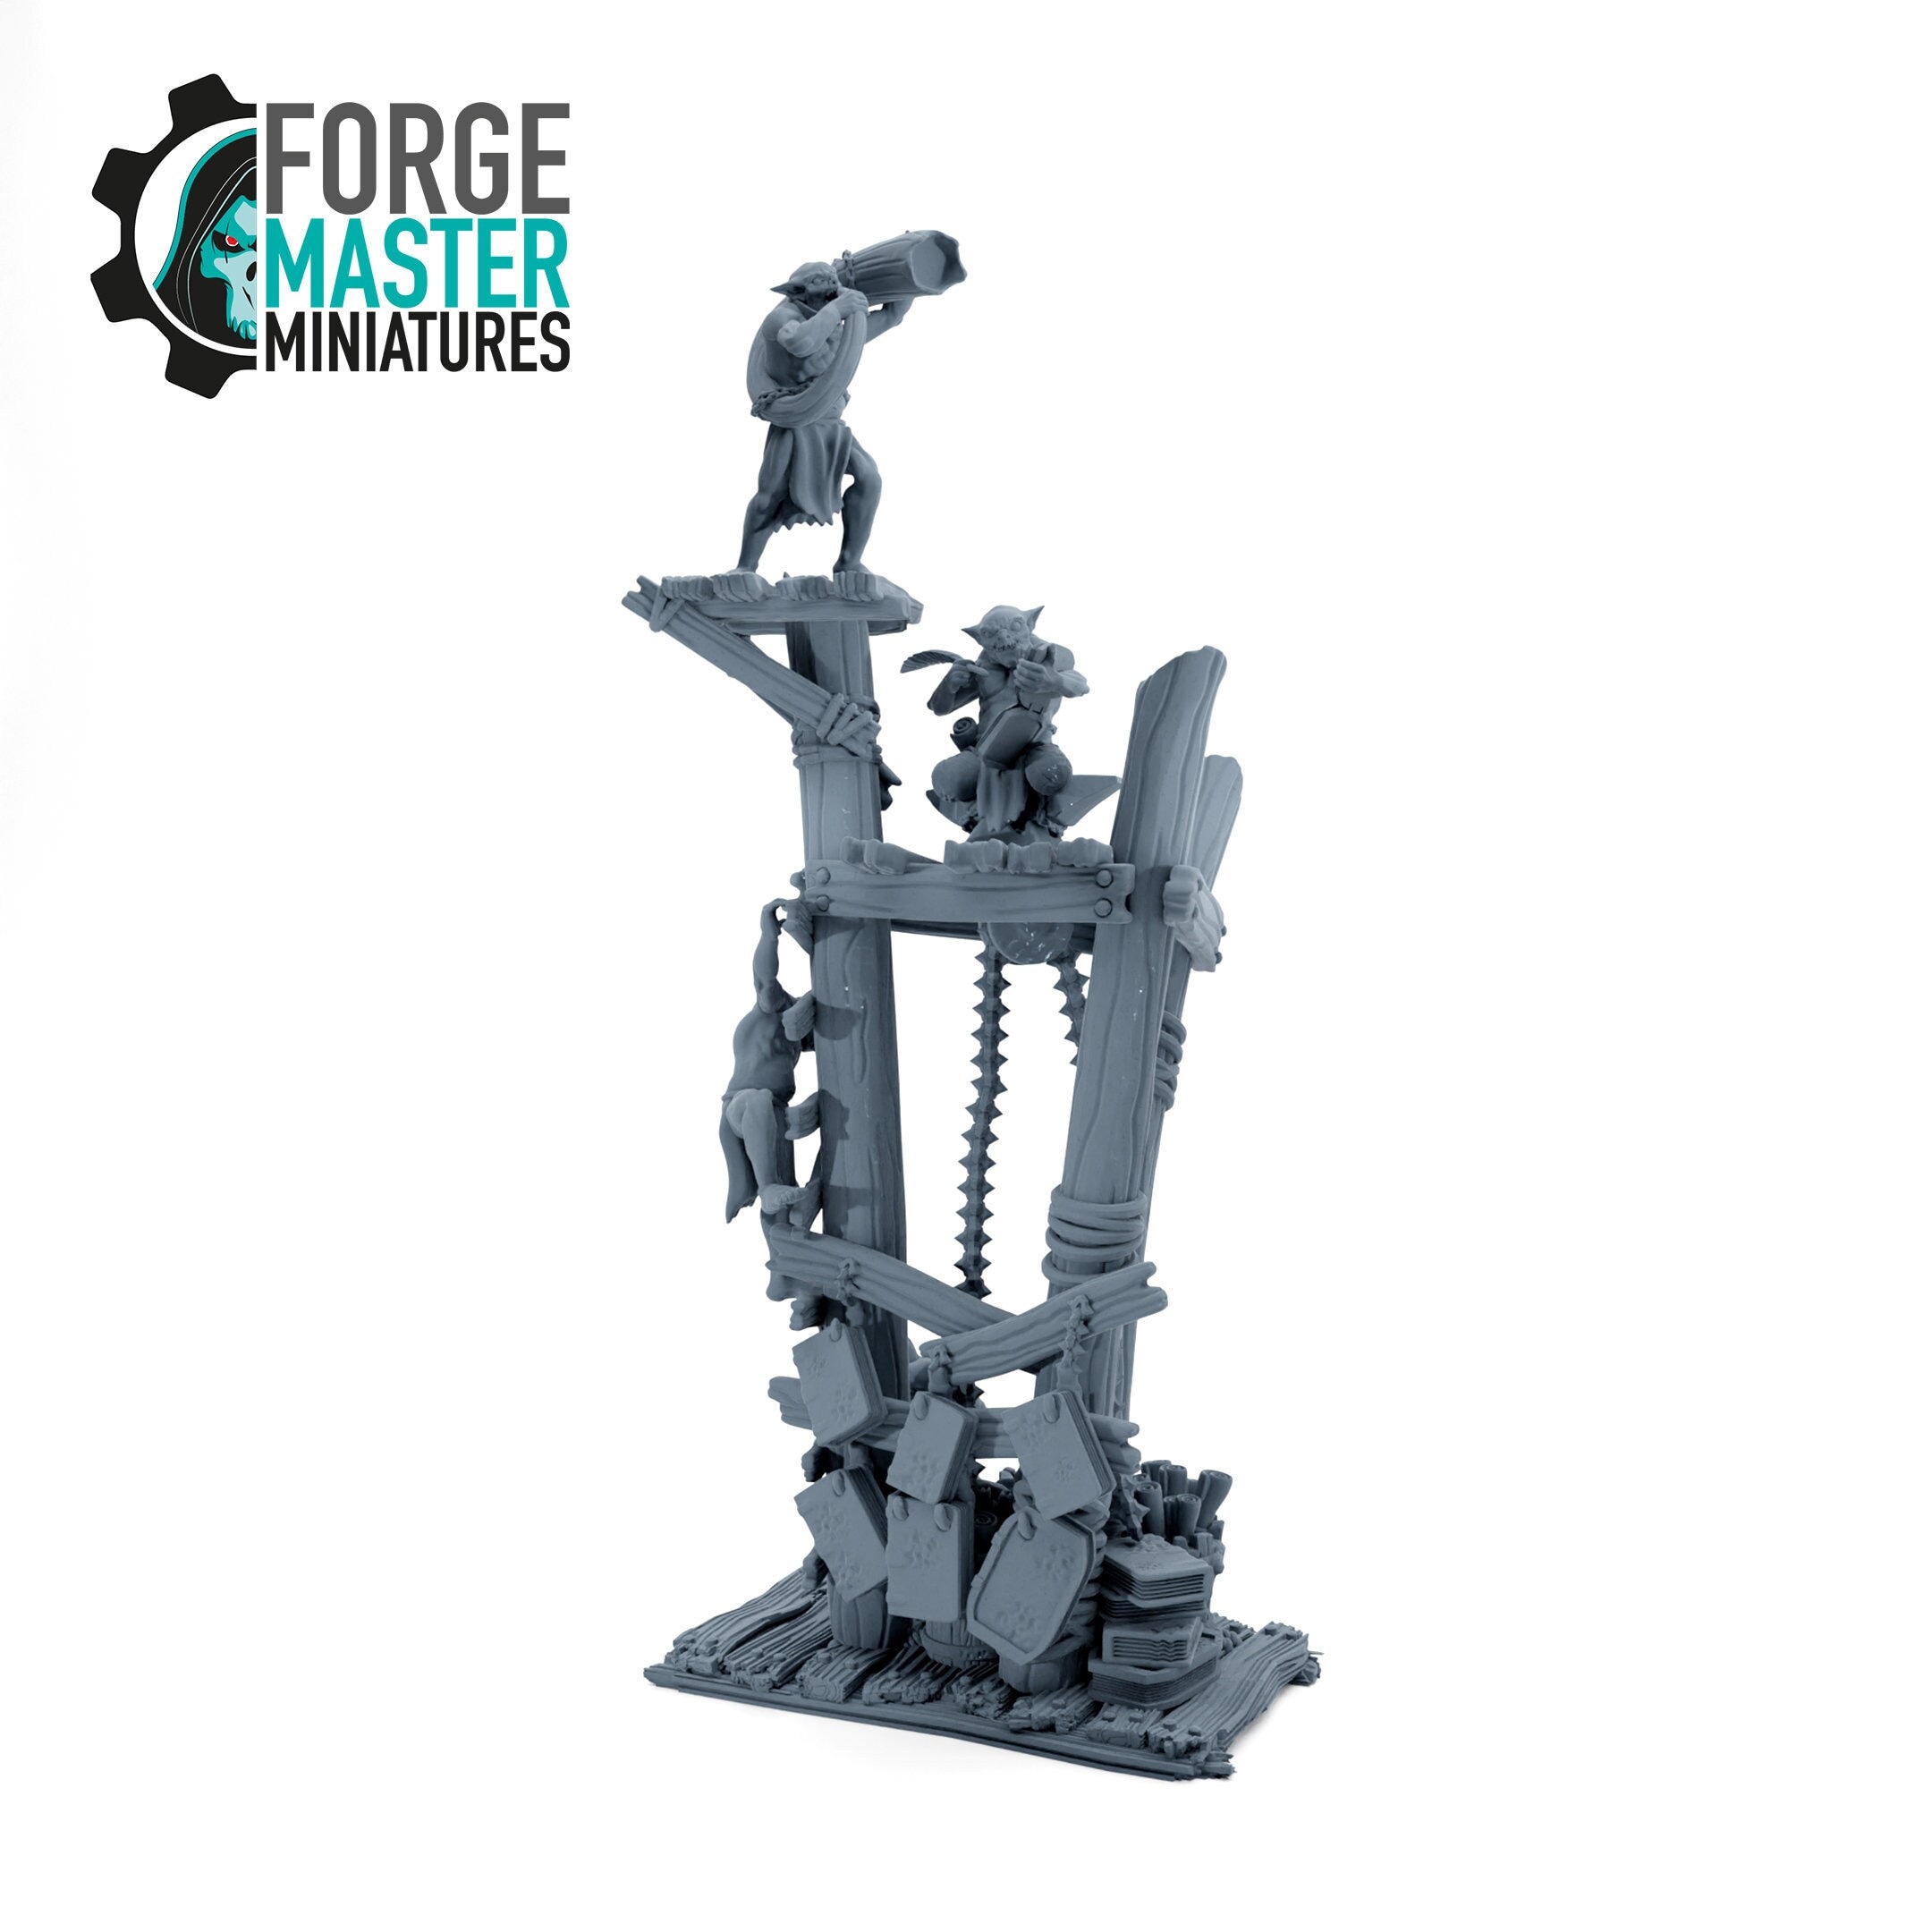 Goblin Slaves Book Keeper wargaming miniature designed by Kzk Minis 3D printed by Forgemaster Miniatures